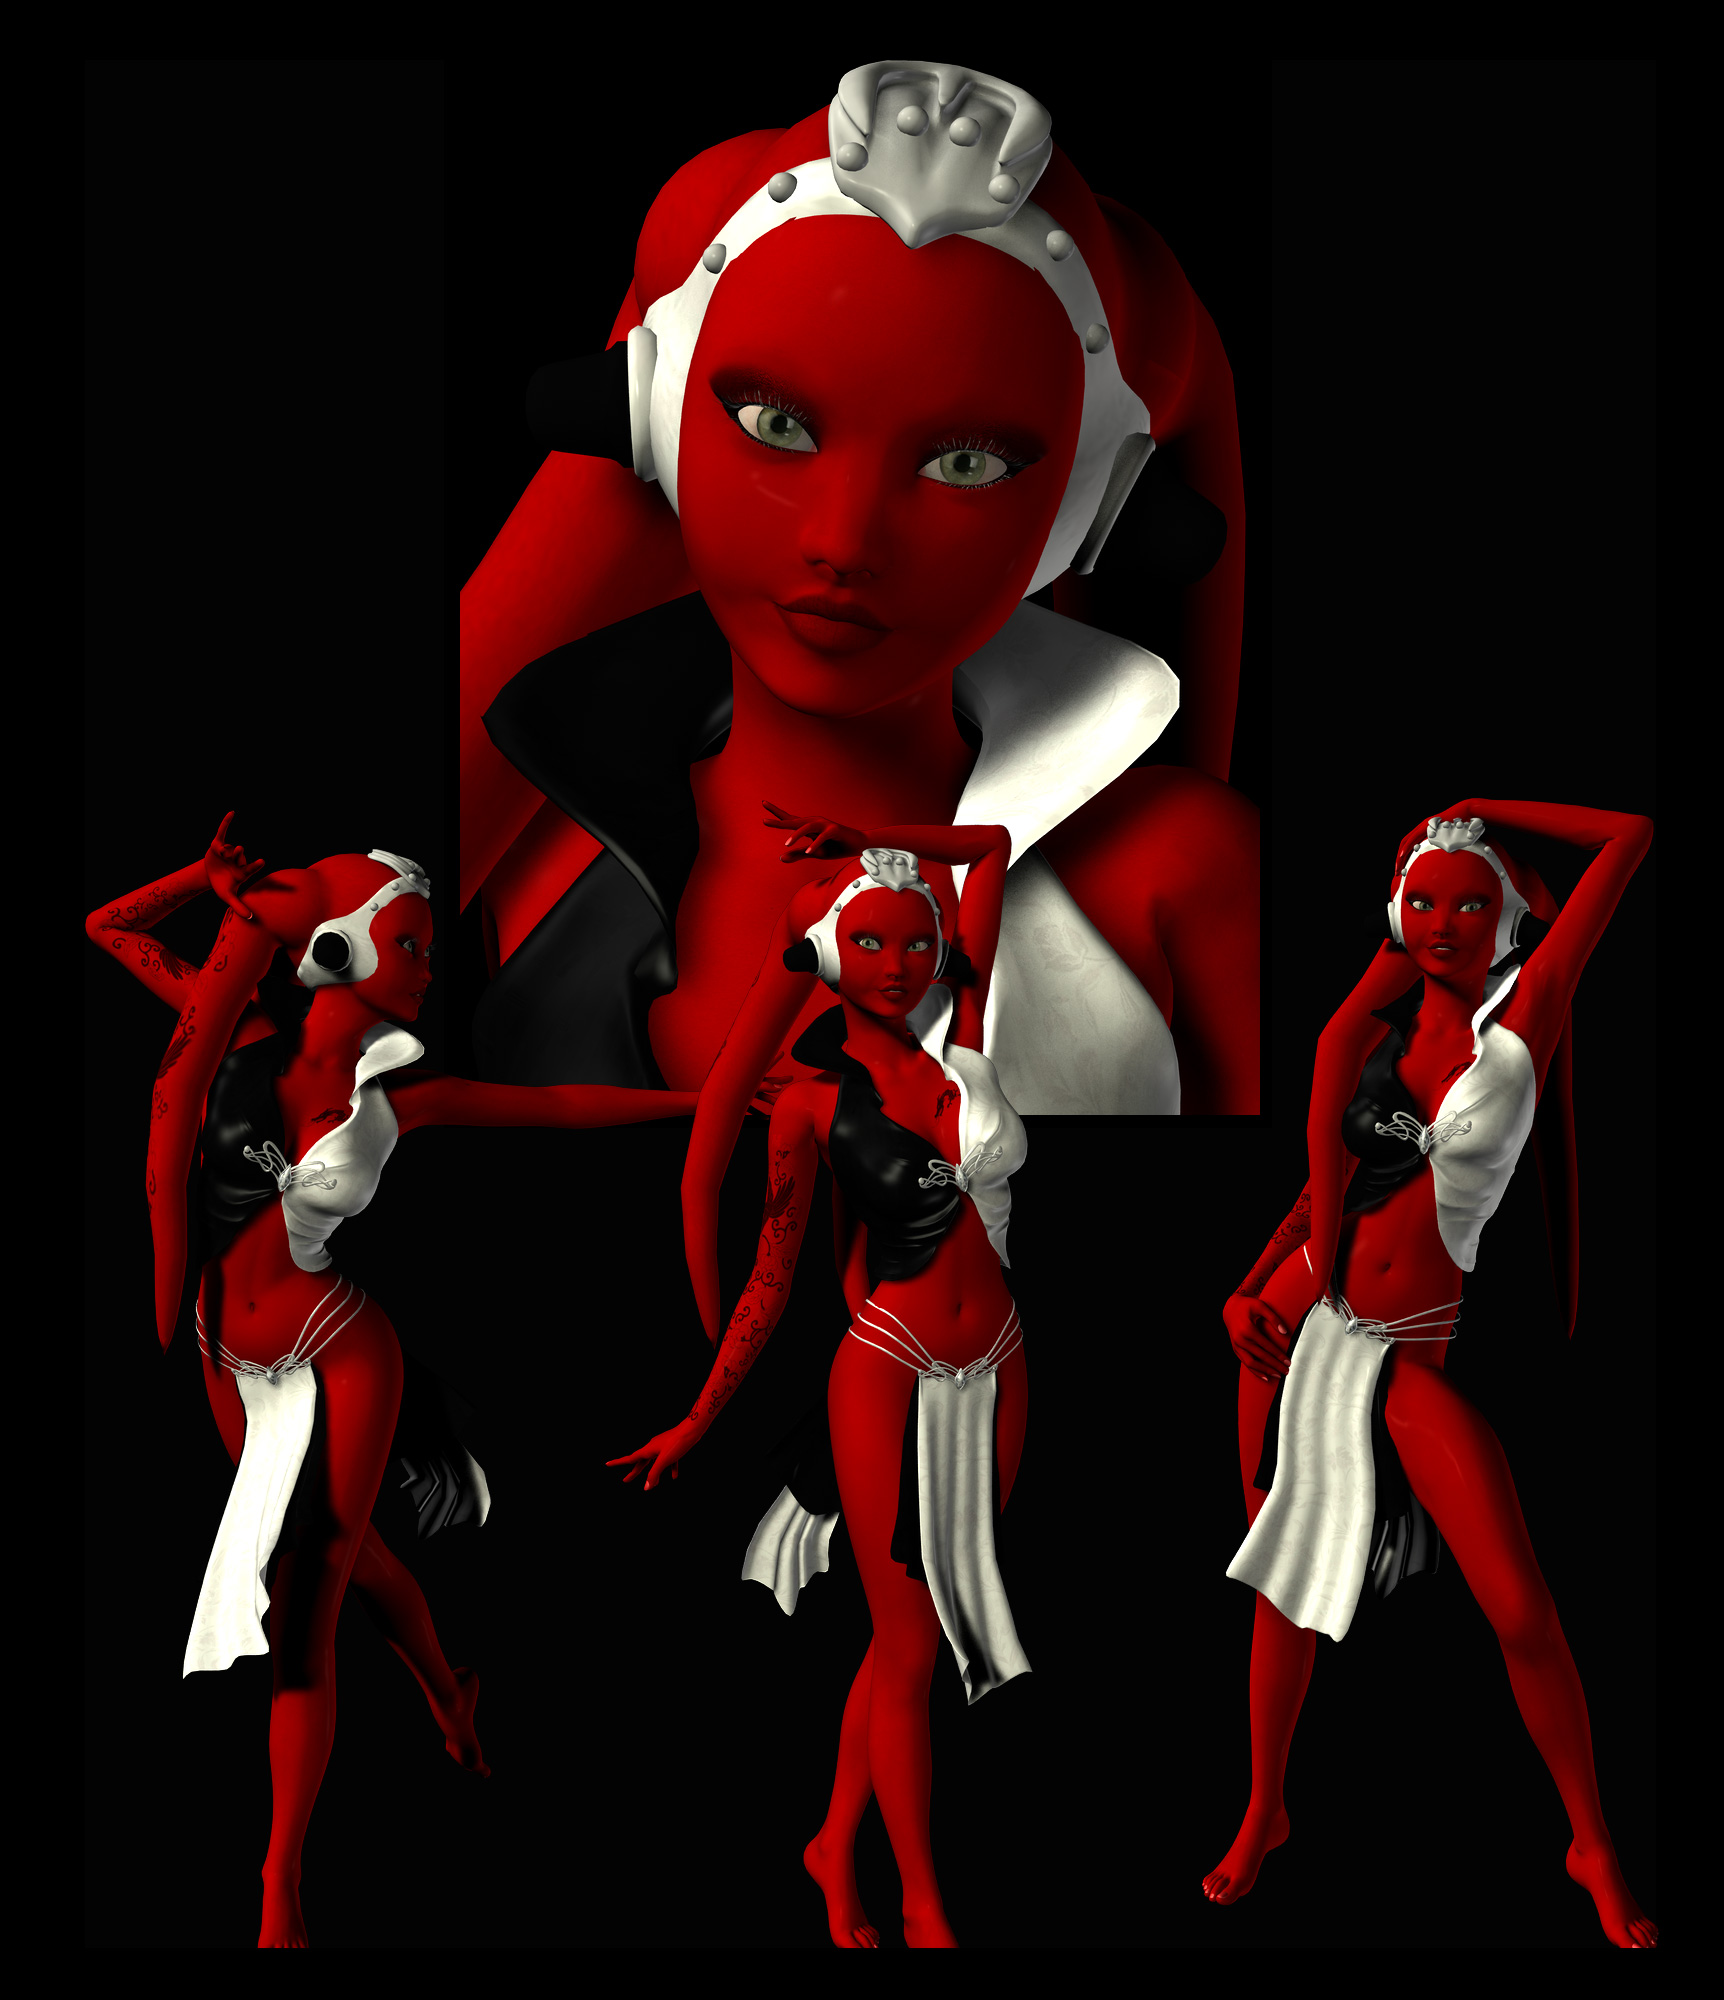 Yet another Twi'lek